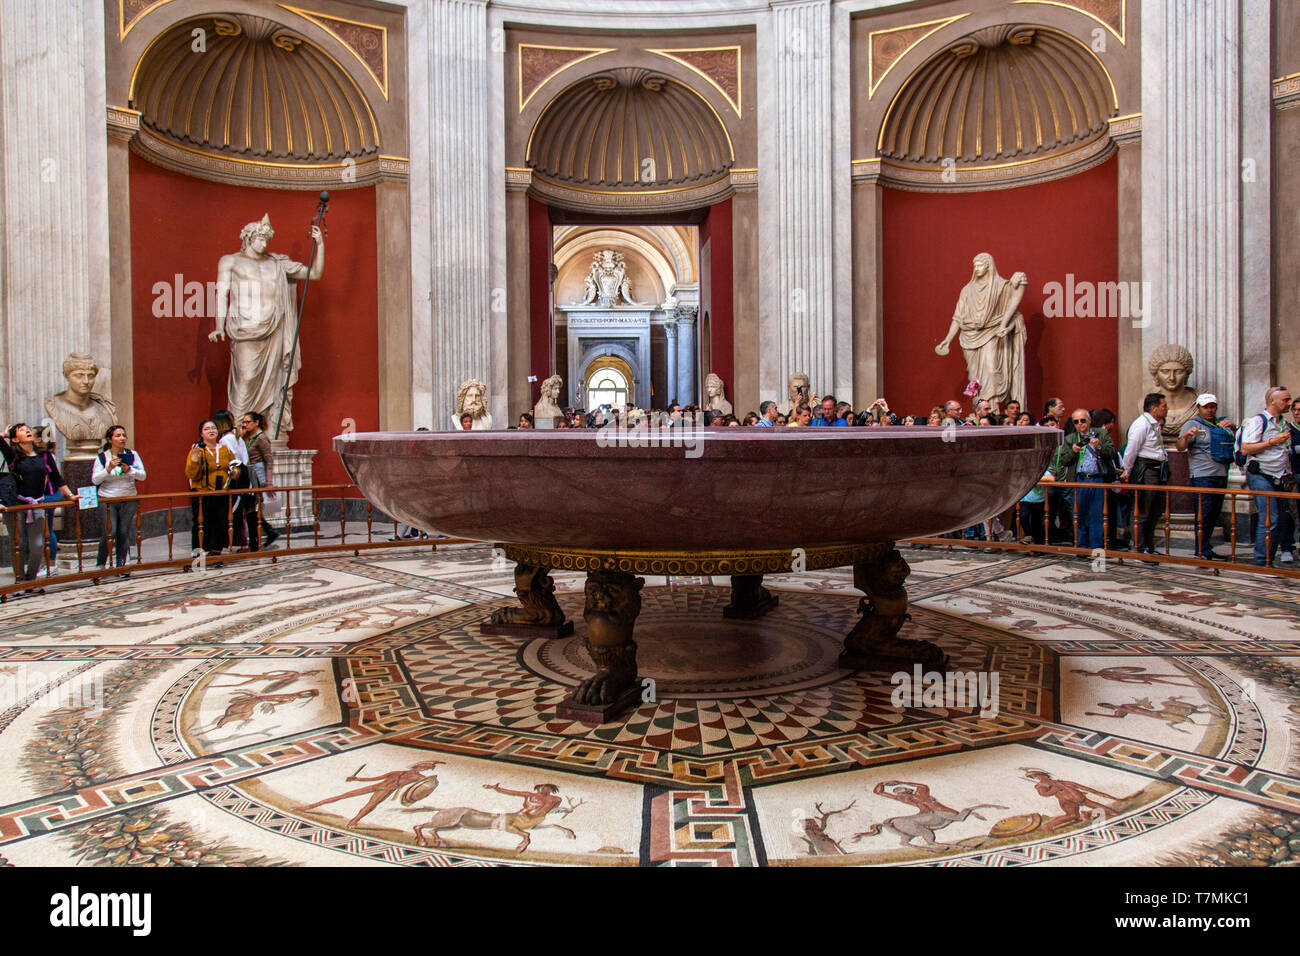 Hercules figures and round monolithic porphyry basin in Round Room in the Vatican Museum,Vatican City, Rome, Italy Stock Photo